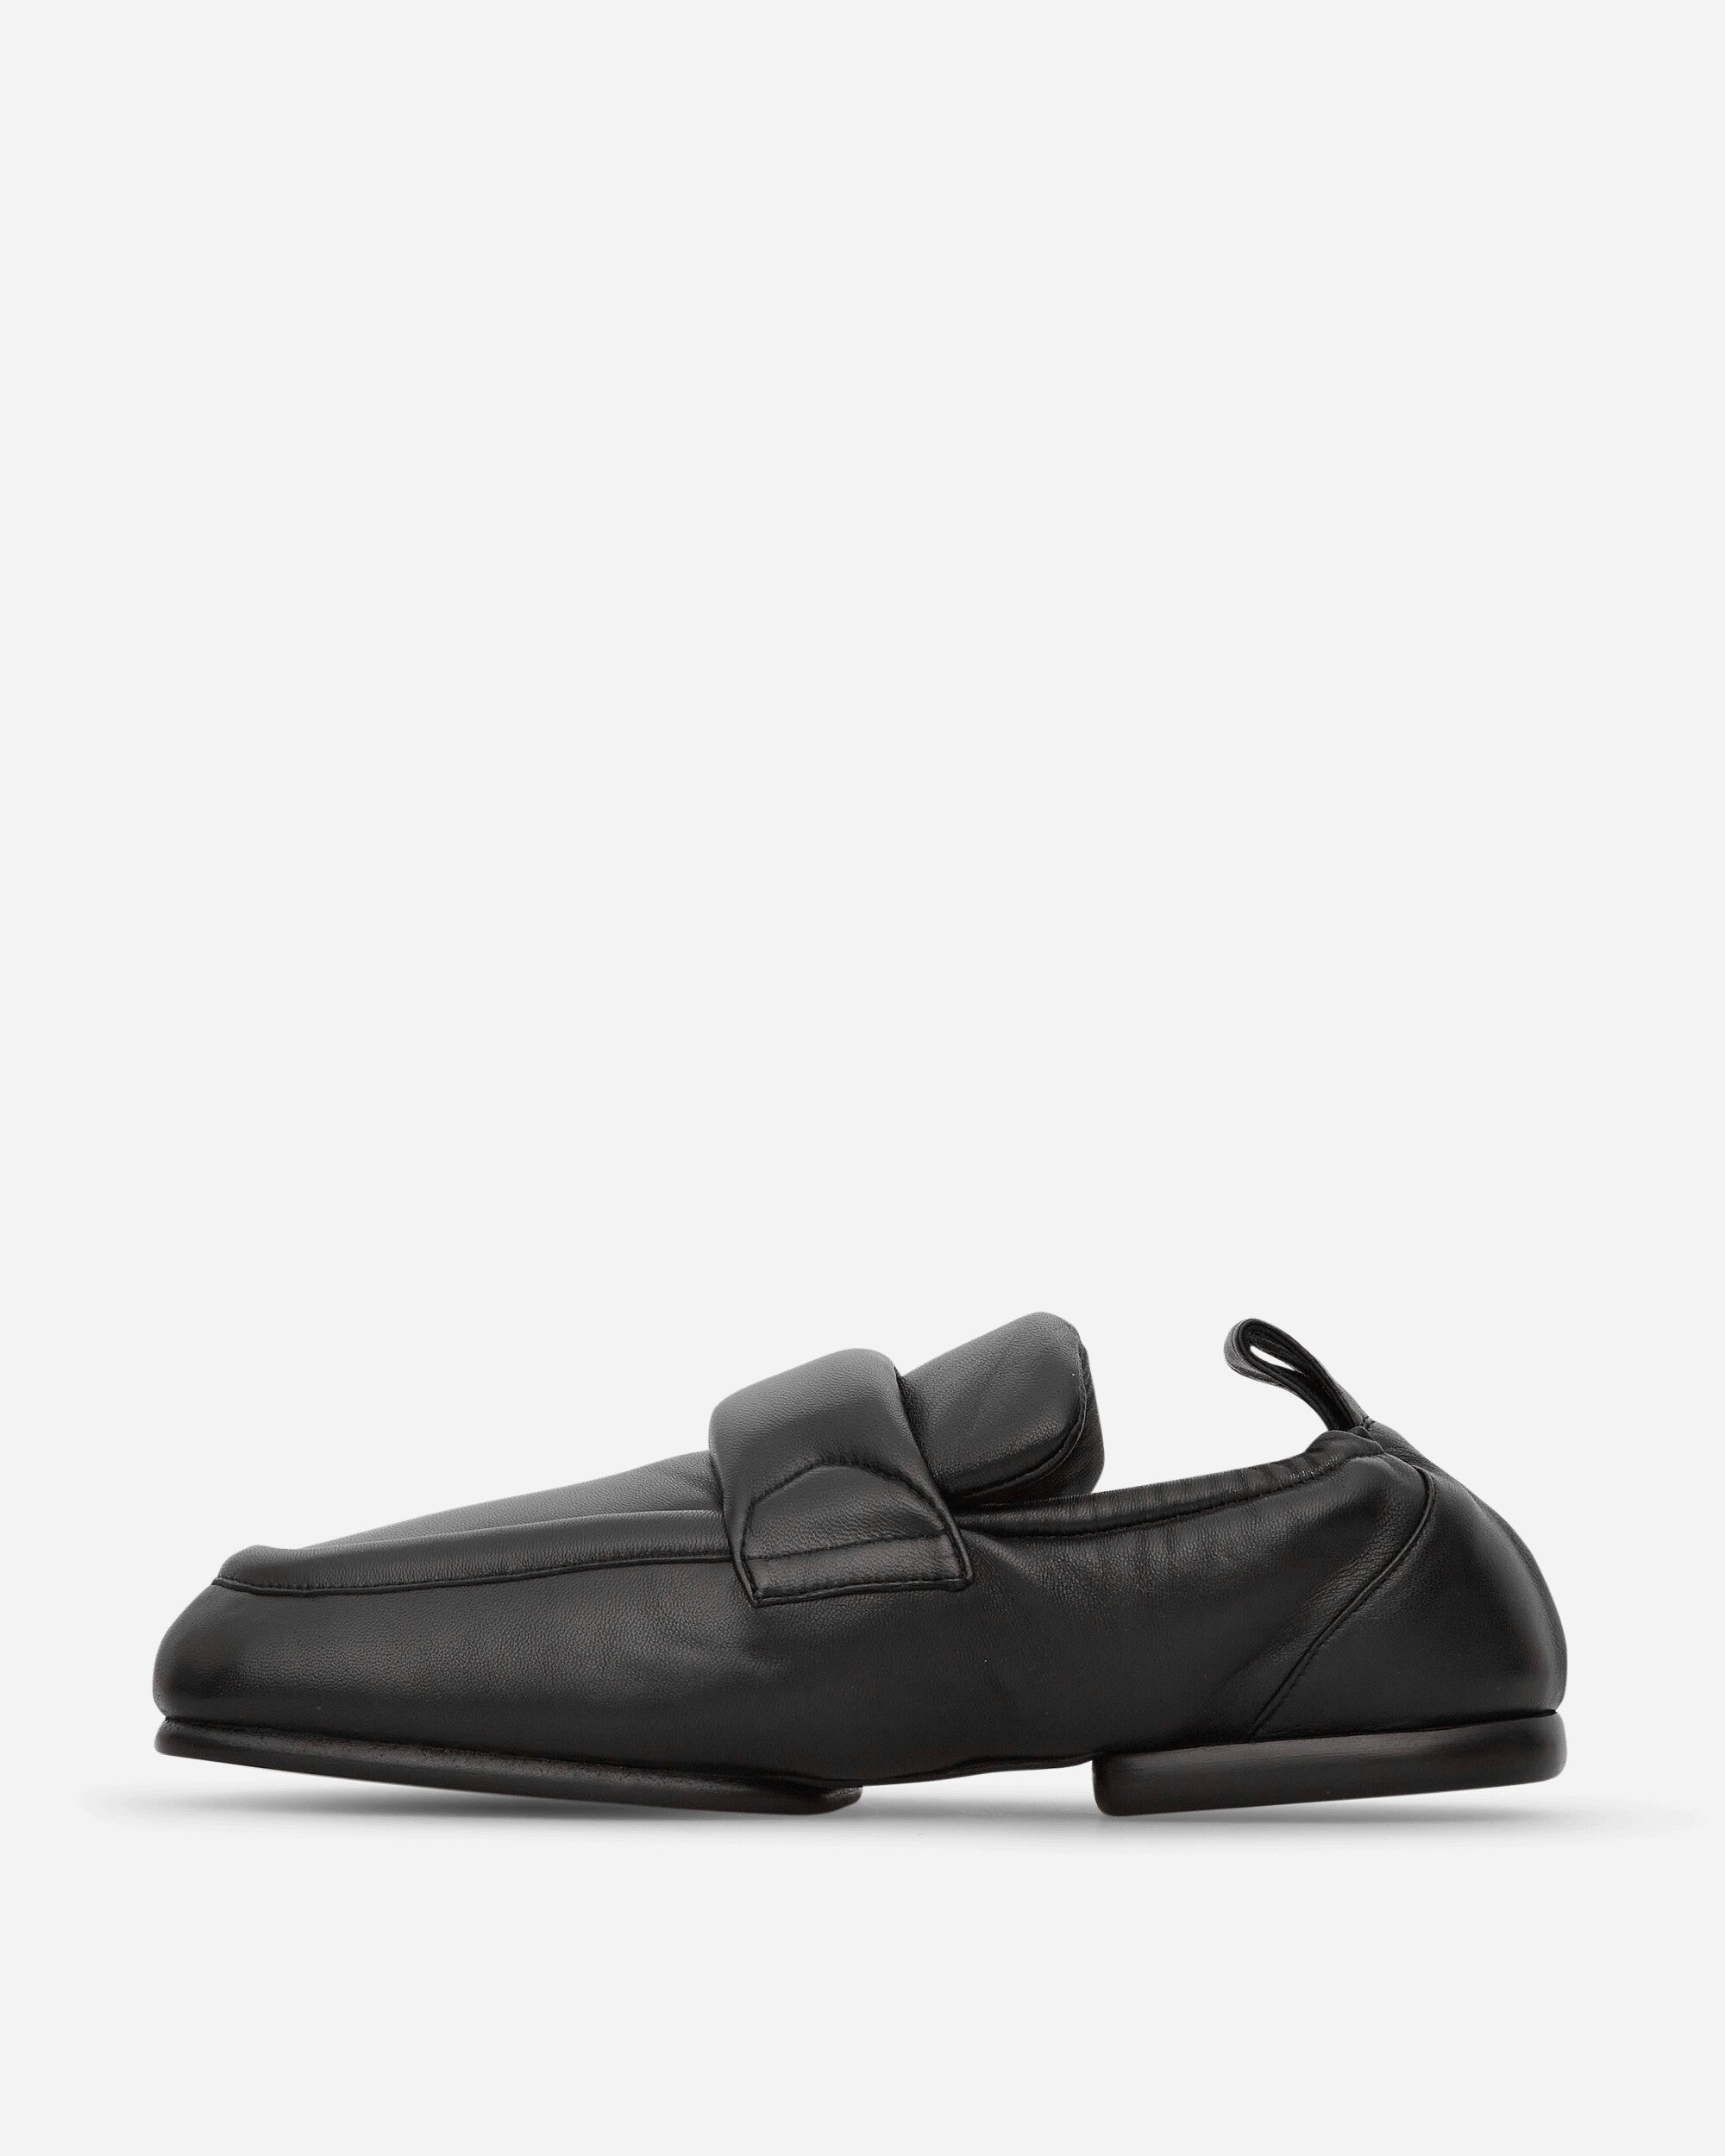 Dries Van Noten Padded Leather Loafers Black Classic Shoes Loafers DU-151 900